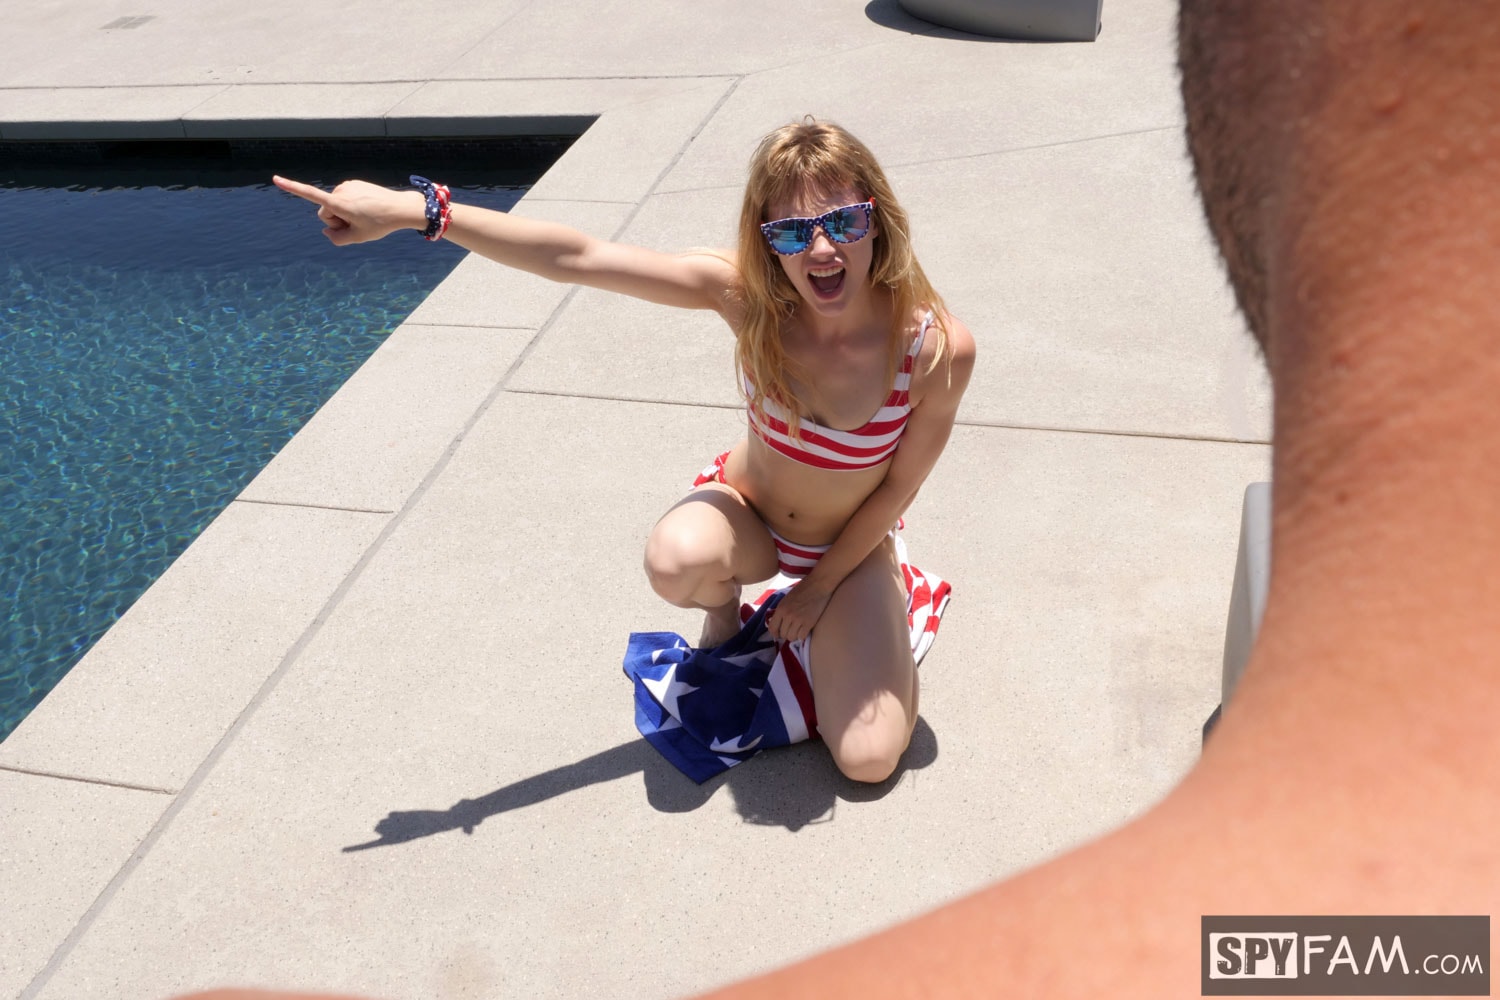 Spy Fam 'Stepsis Rides StepBro's Rocket For July 4th' starring Ivy Wolfe (Photo 7)